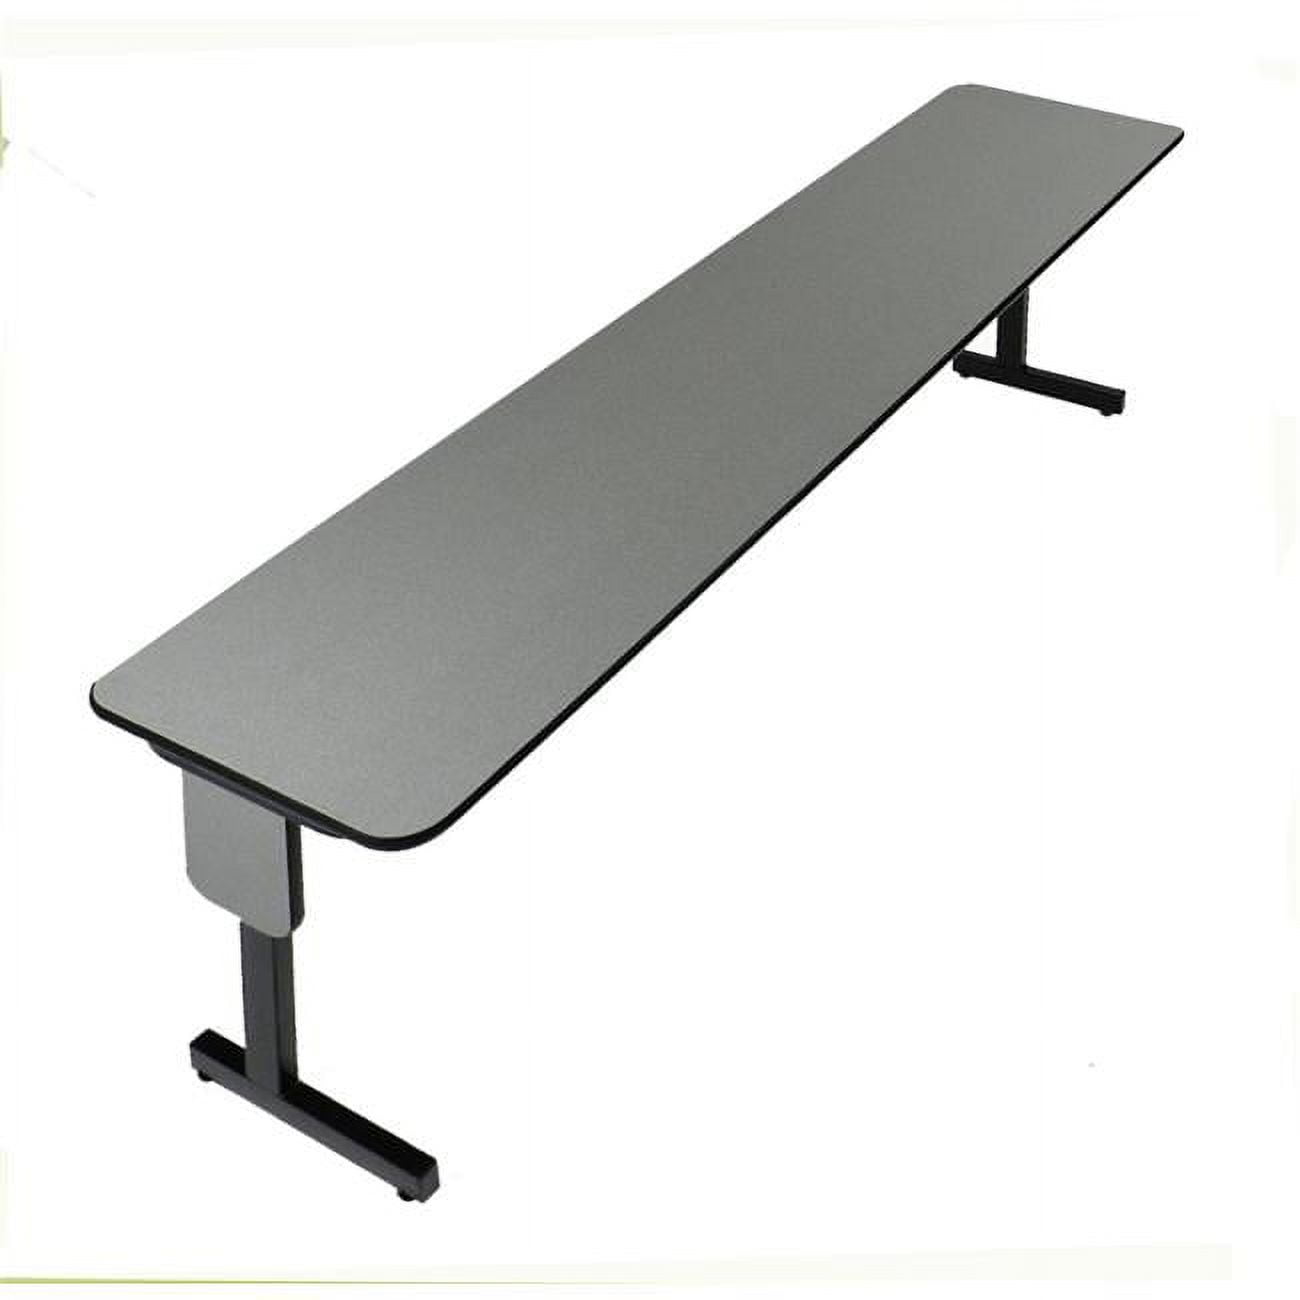 Spa2472px-55 Adjustable Height 0.75 In. High Pressure Rectangular Folding Seminar Table With Panel Leg, Montana Granite - 24 X 72 In.